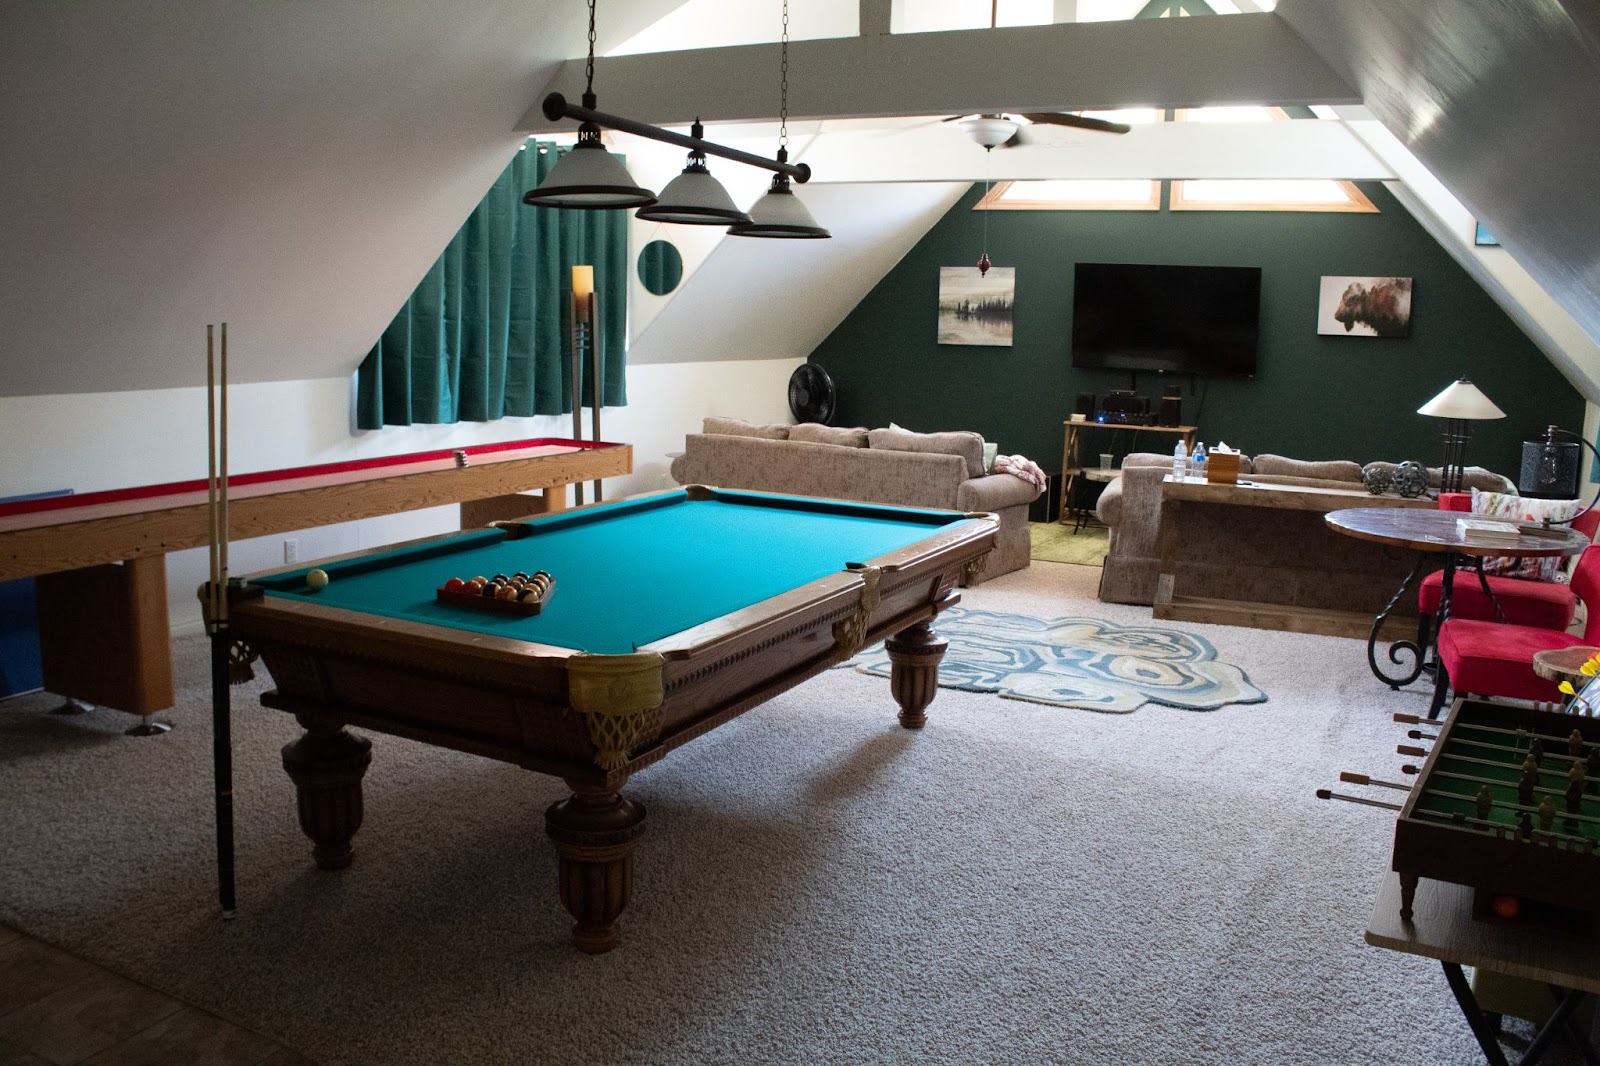 Turn Your Spare Room Into a Game & Activity Room